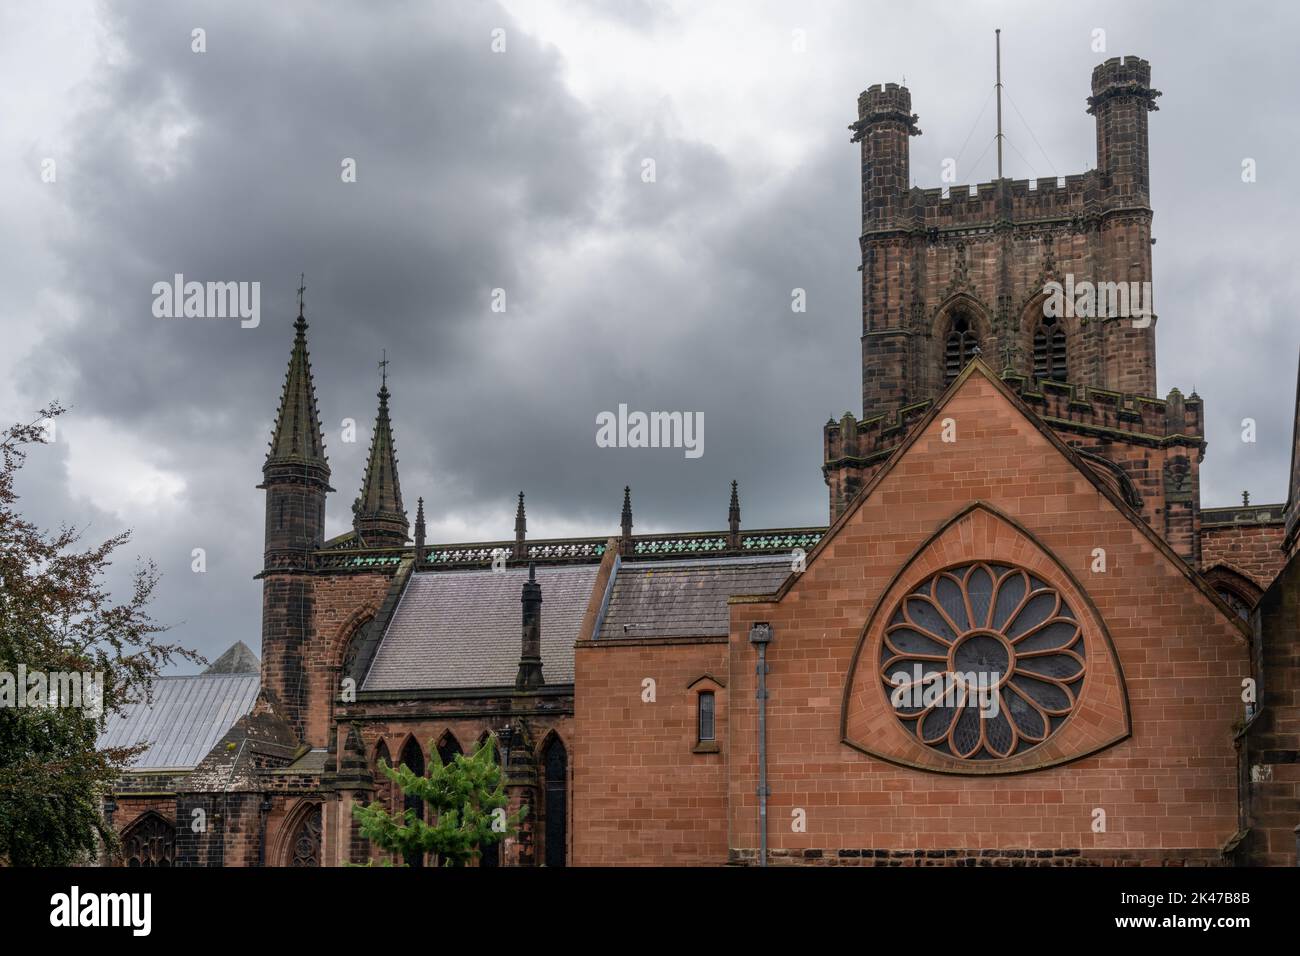 Chester, United Kingdom - 26 August, 2022: architectural detail of the historic Chester Cathedral in Cheshire under an overcast sky Stock Photo